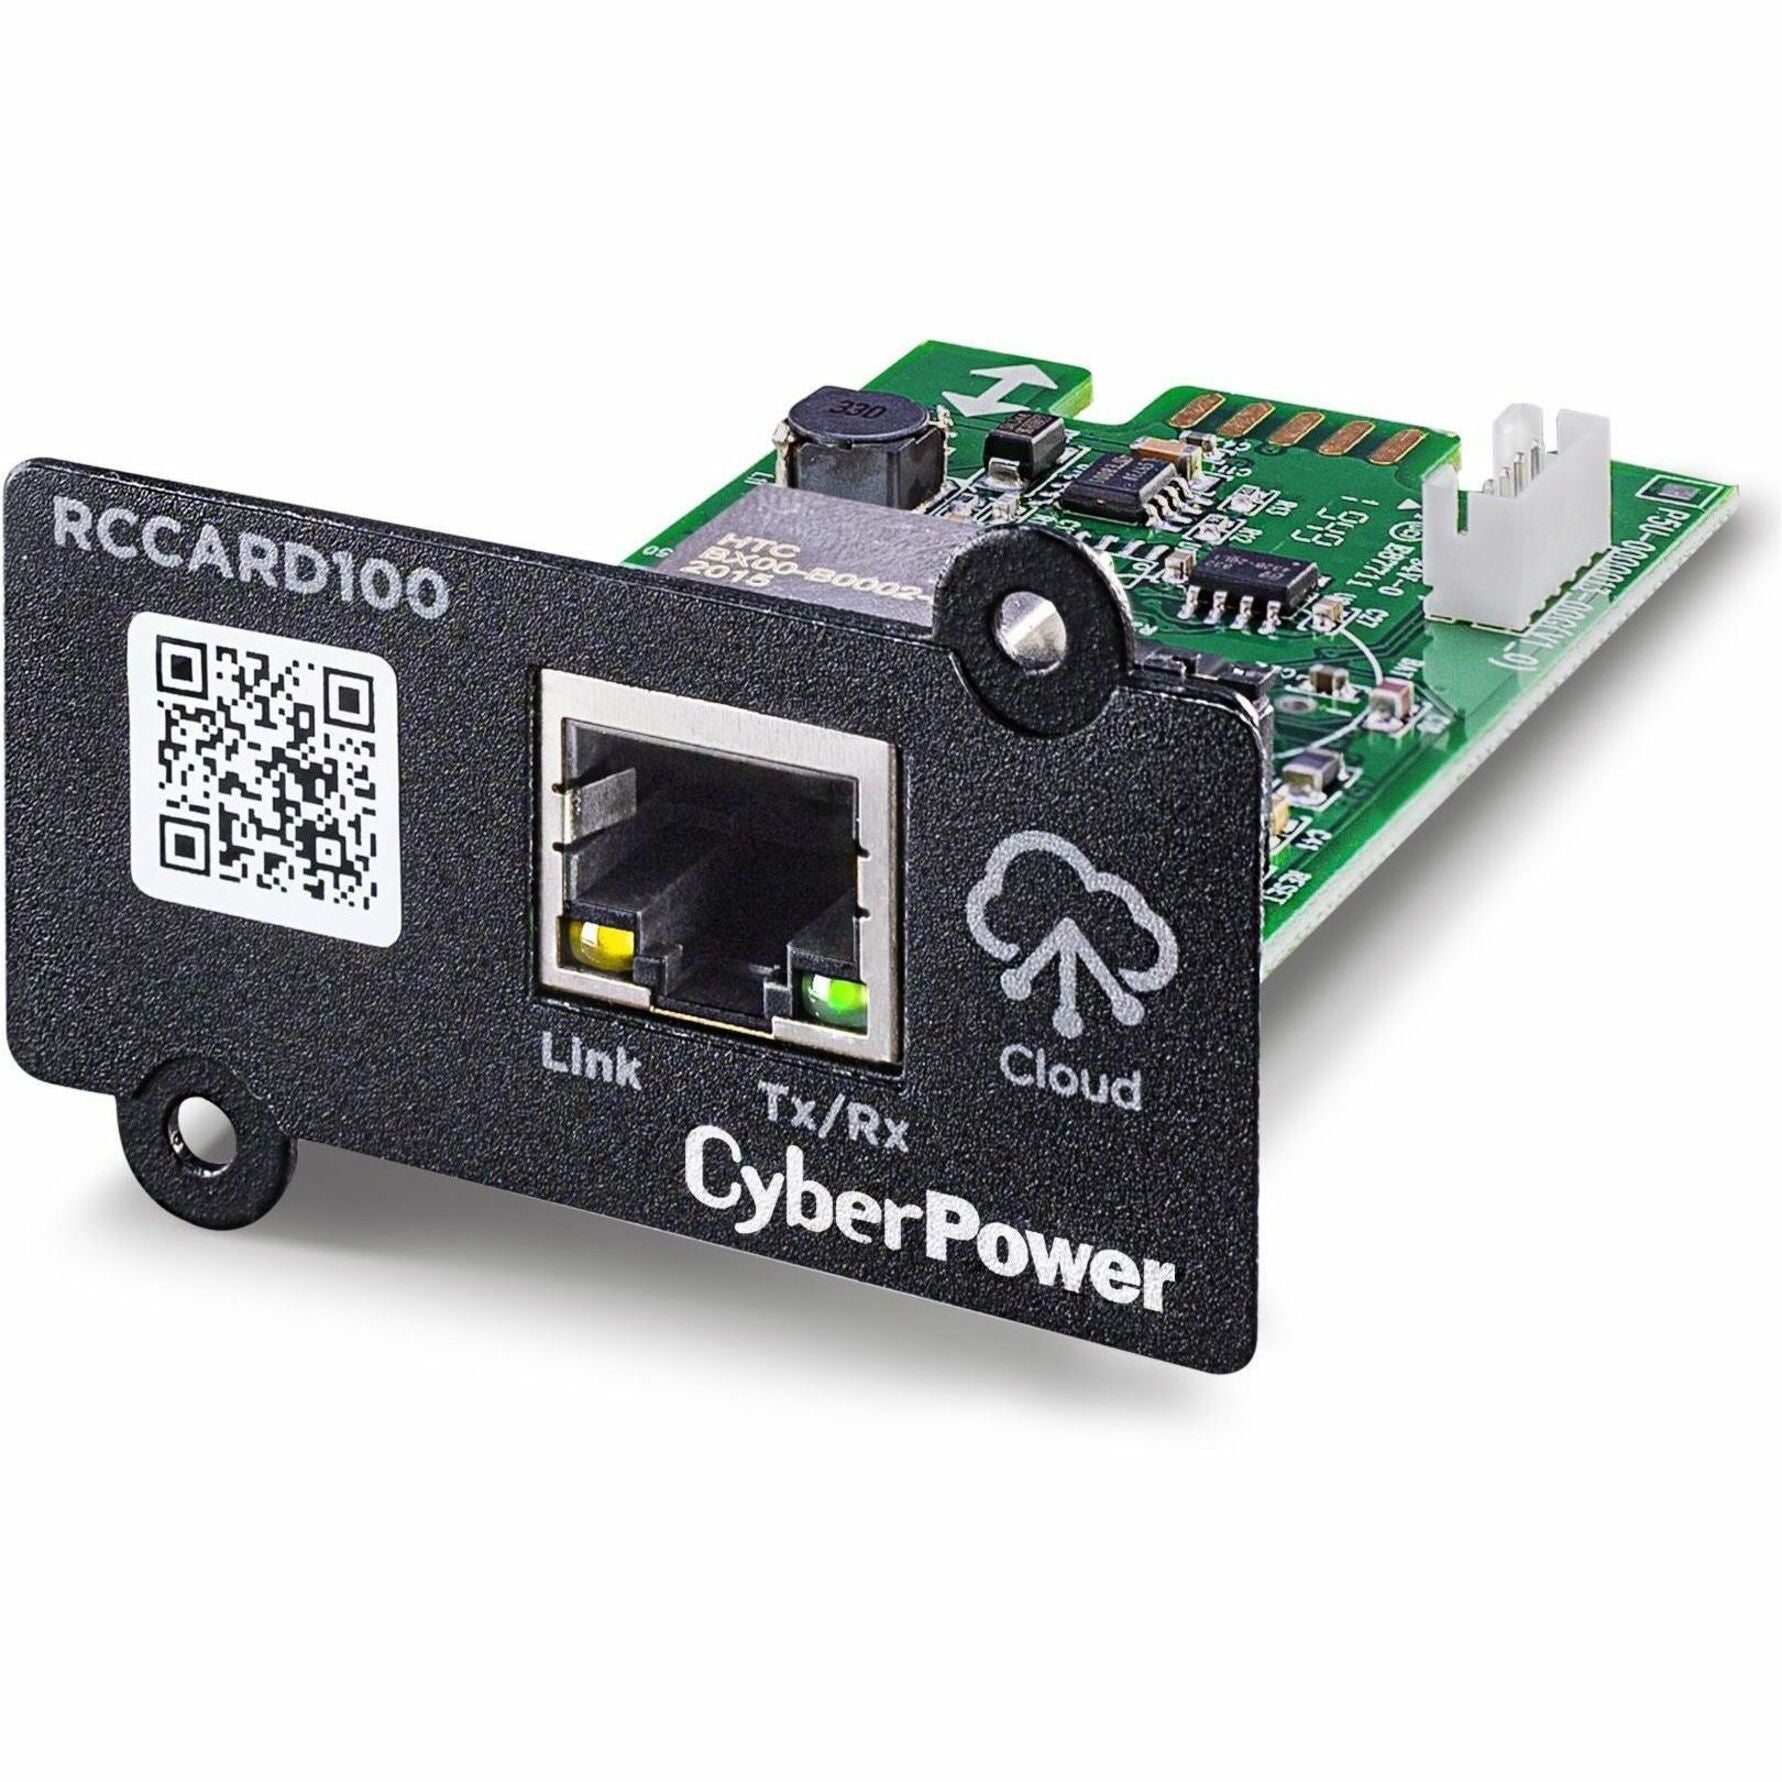 CyberPower RCCARD100 Convenient Remote Power Management For UPS, Cloud Monitoring Card